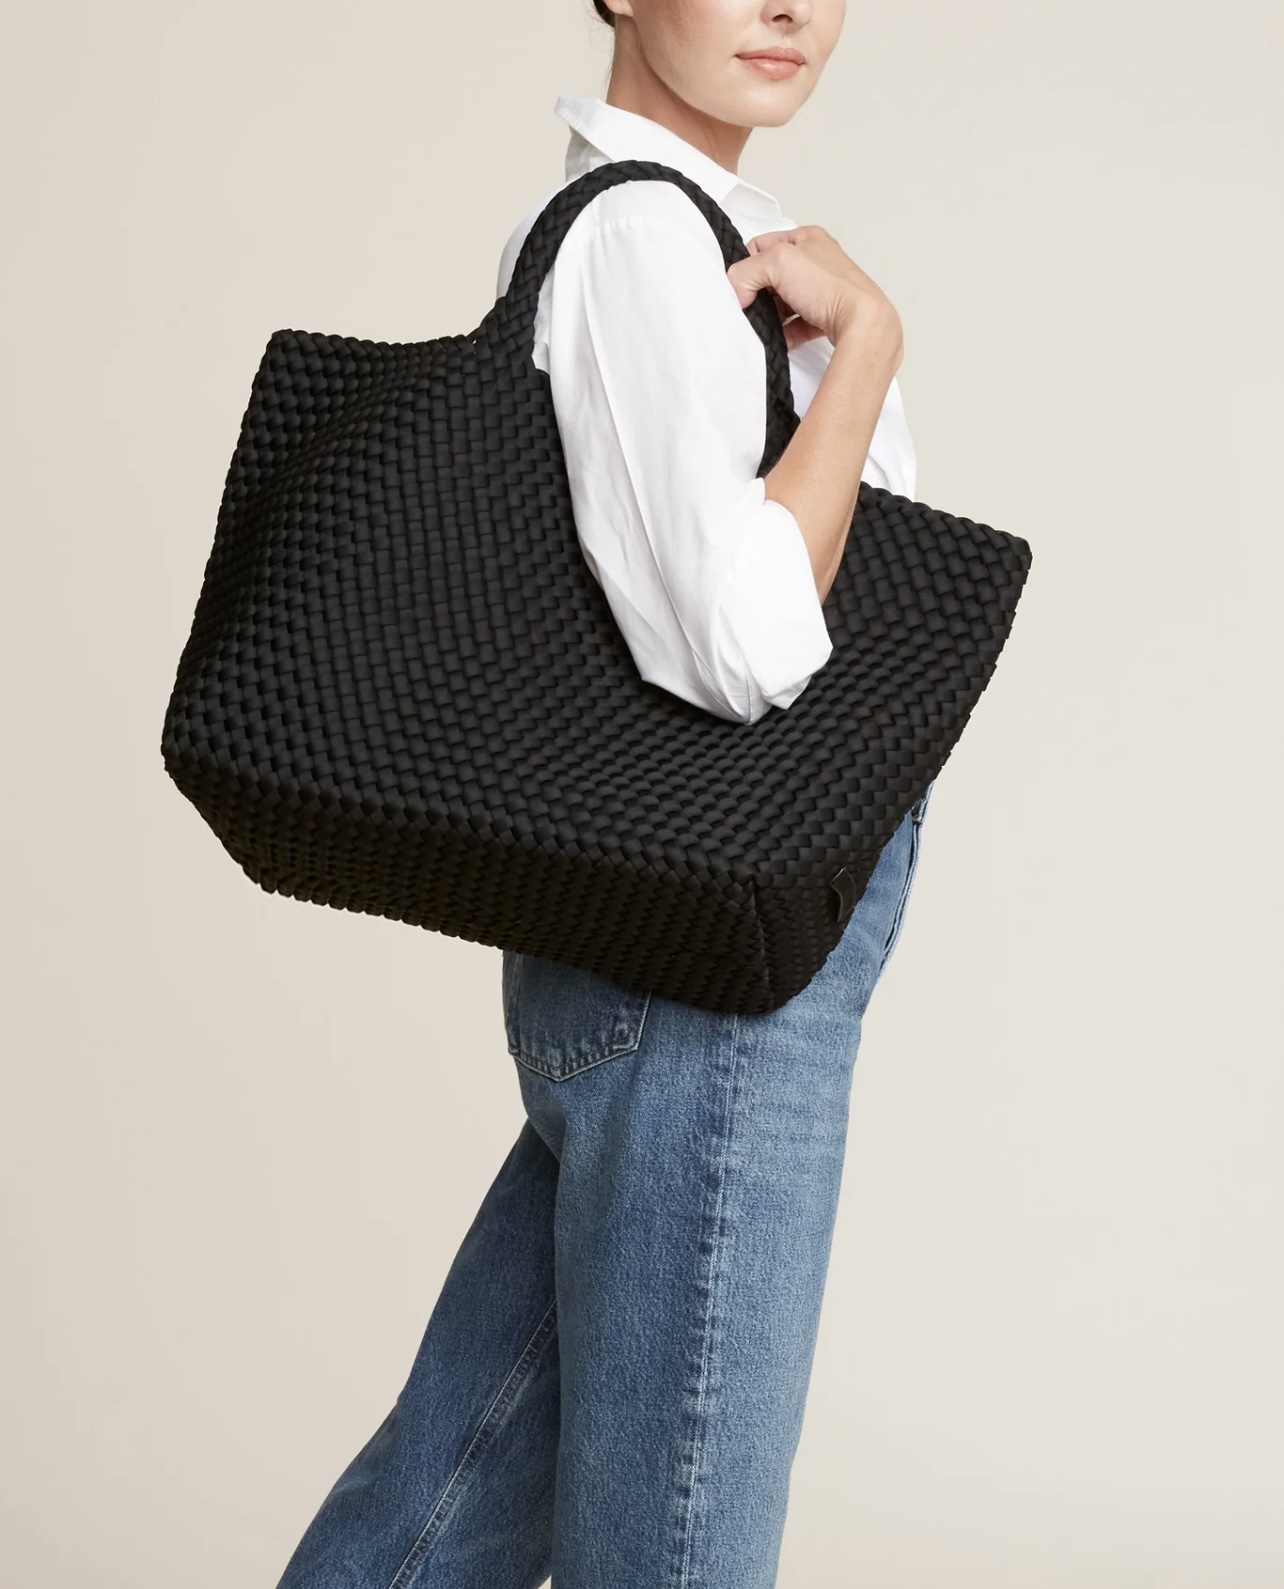 NAGHEDI Handwoven Large Tote St. Barth in Black